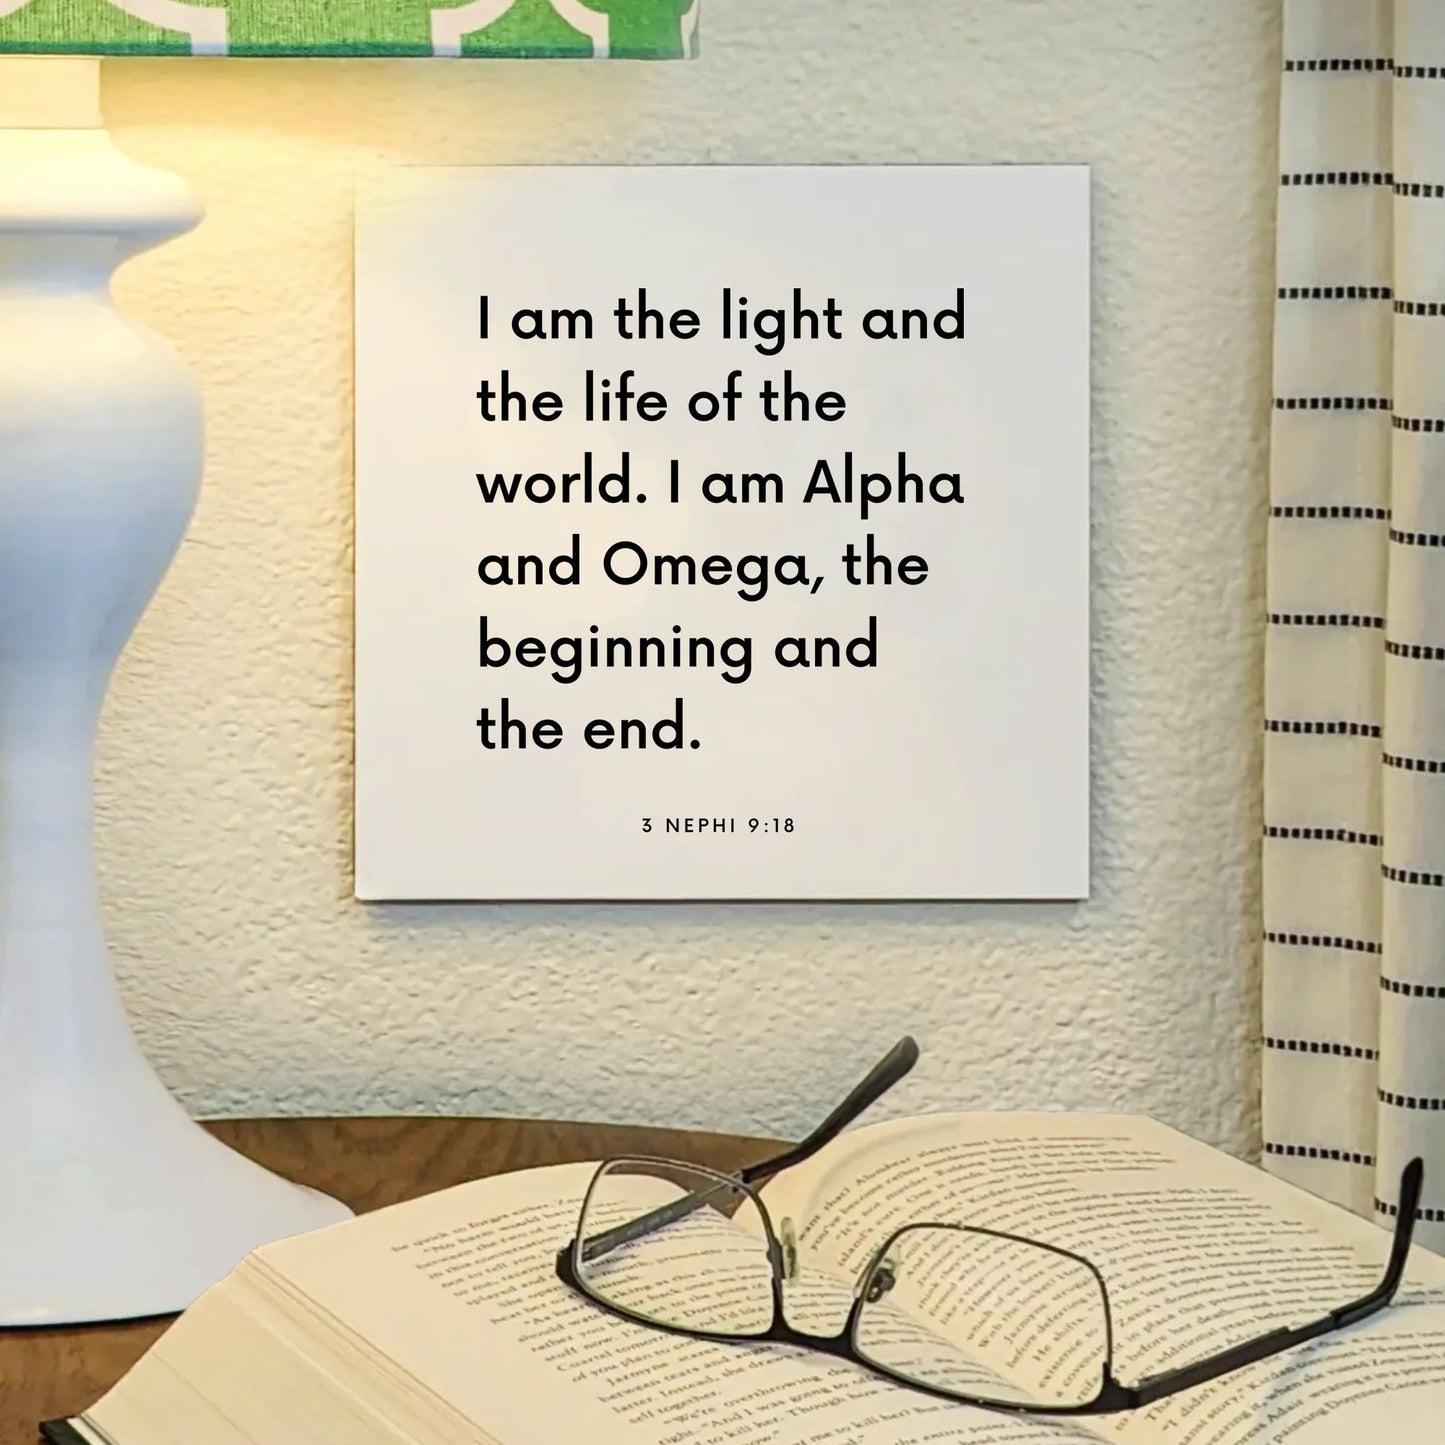 Lamp mouting of the scripture tile for 3 Nephi 9:18  - "I am Alpha and Omega, the beginning and the end"